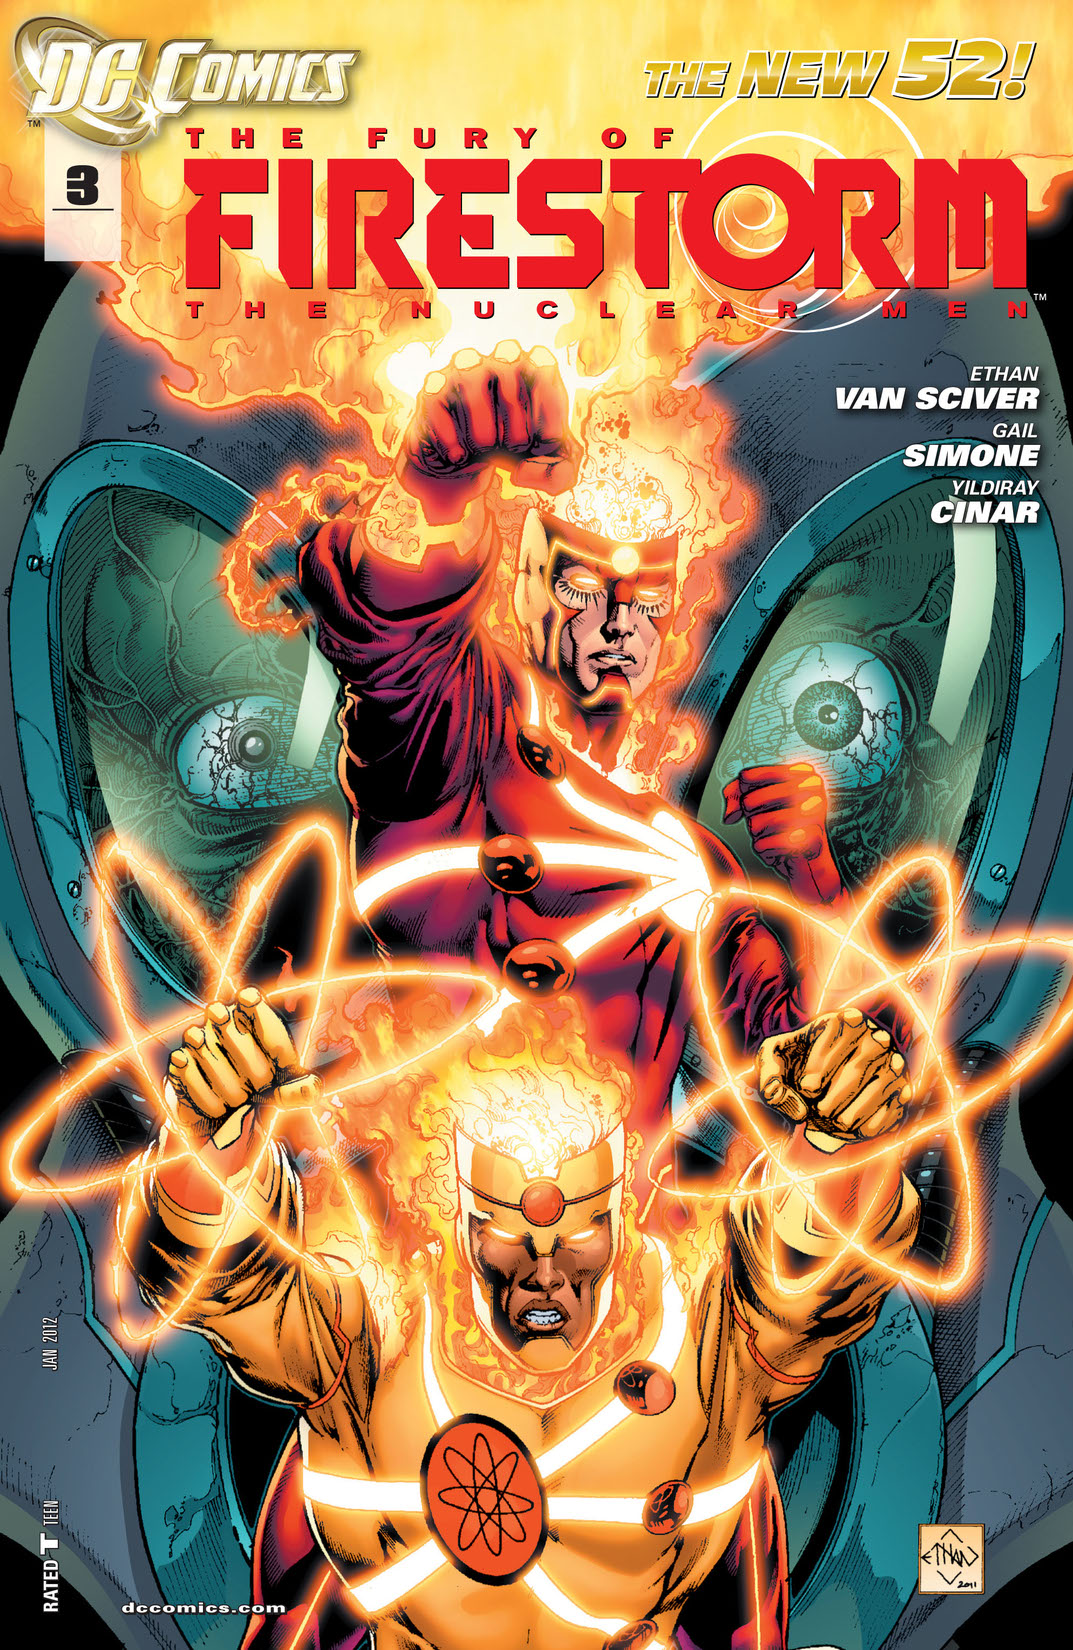 The Fury of Firestorm: The Nuclear Men #3 preview images